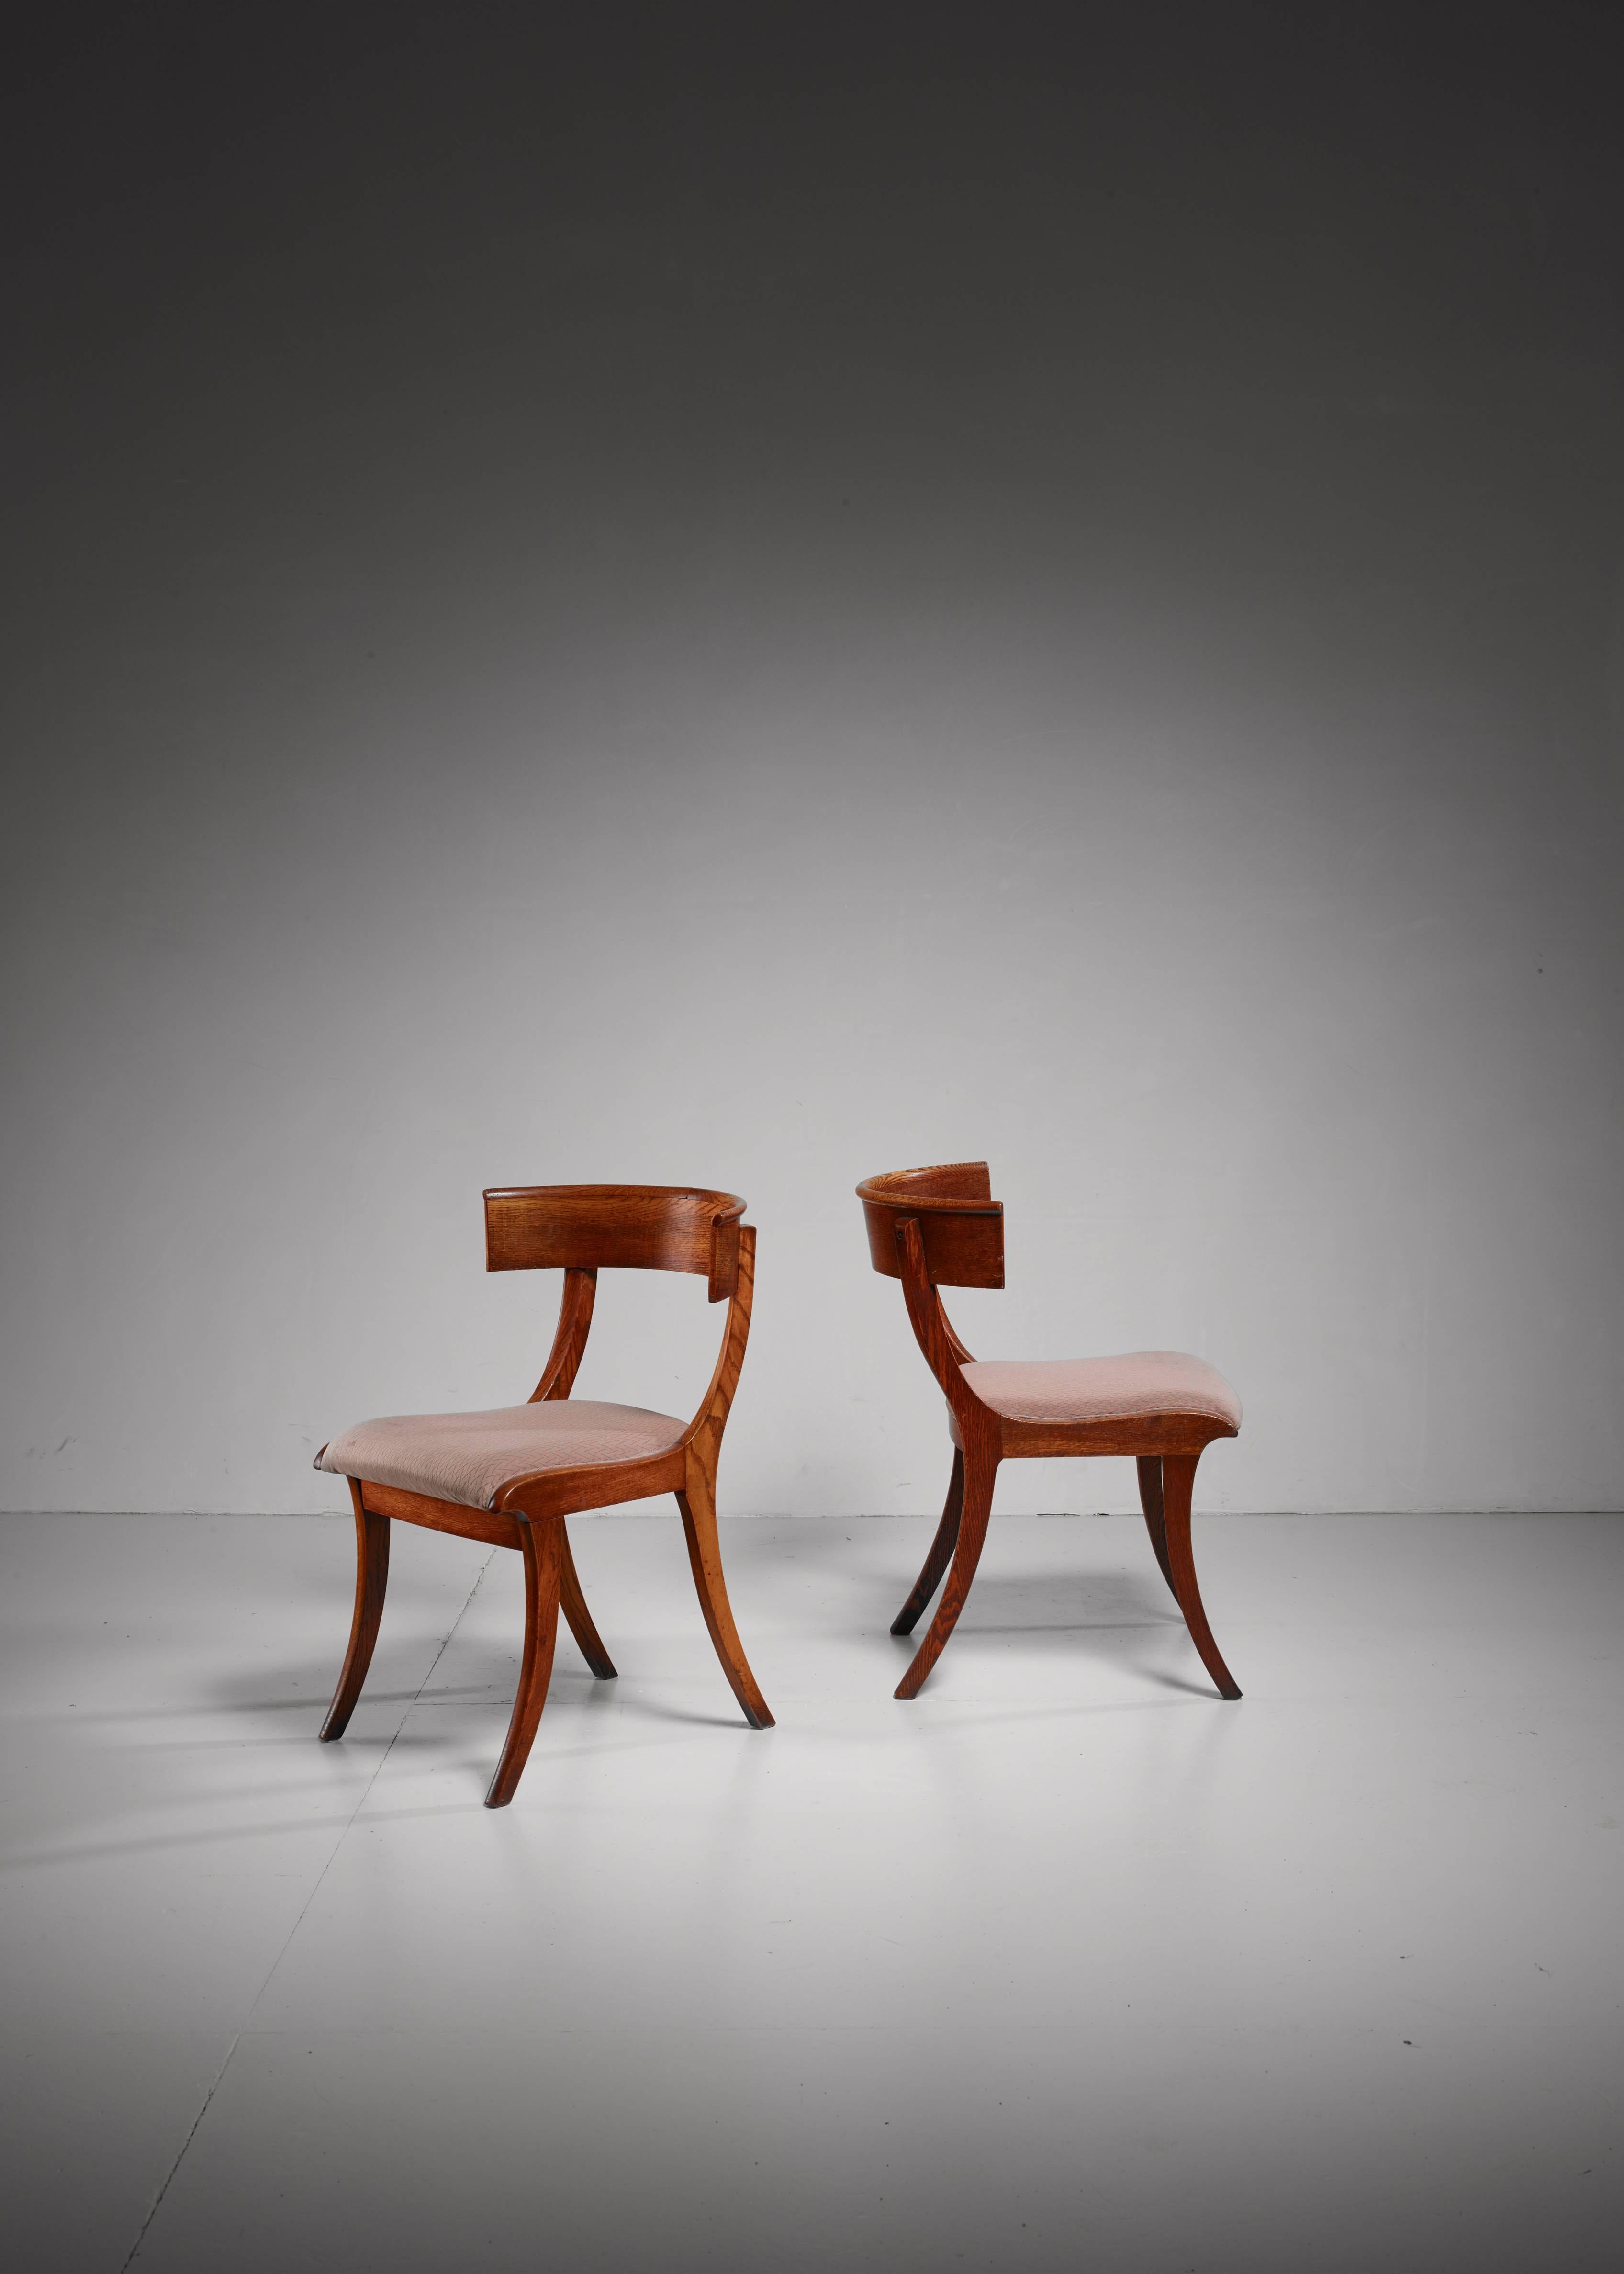 A pair of oak Danish Klismos chairs with a fabric upholstery in old pink with a geometric pattern.

The design of the Klismos chair, with its wide and curved backrest and sabre legs, can be traced back to Ancient Greece (5th century BCE). Elegant